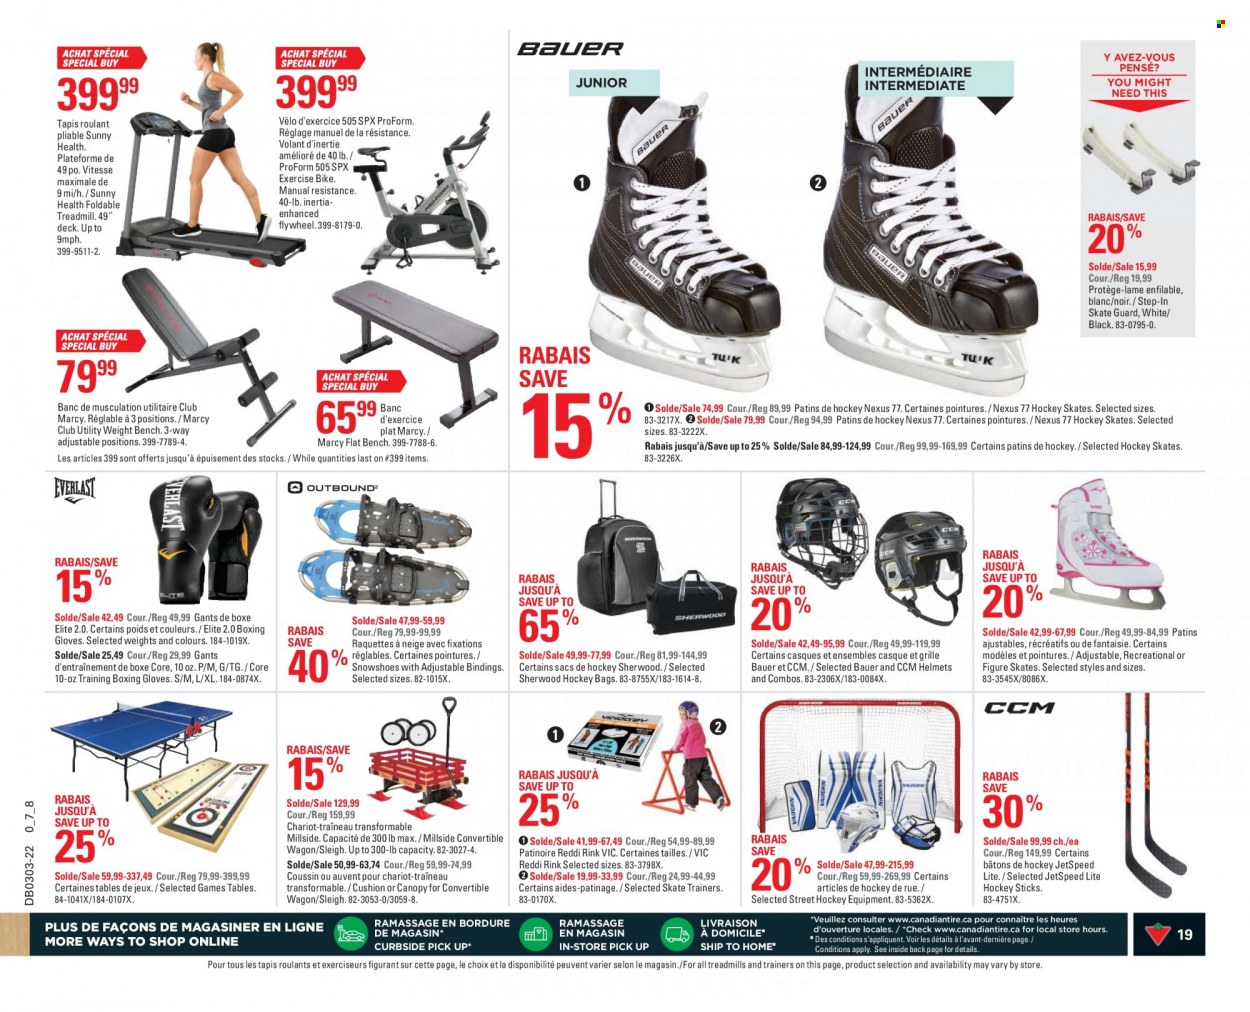 thumbnail - Canadian Tire Flyer - January 13, 2022 - January 19, 2022 - Sales products - bag, gloves, cushion, table, bench, trainers, treadmill, ProForm, weights set, boxing bag gloves, hockey skates, skates, wagon. Page 19.